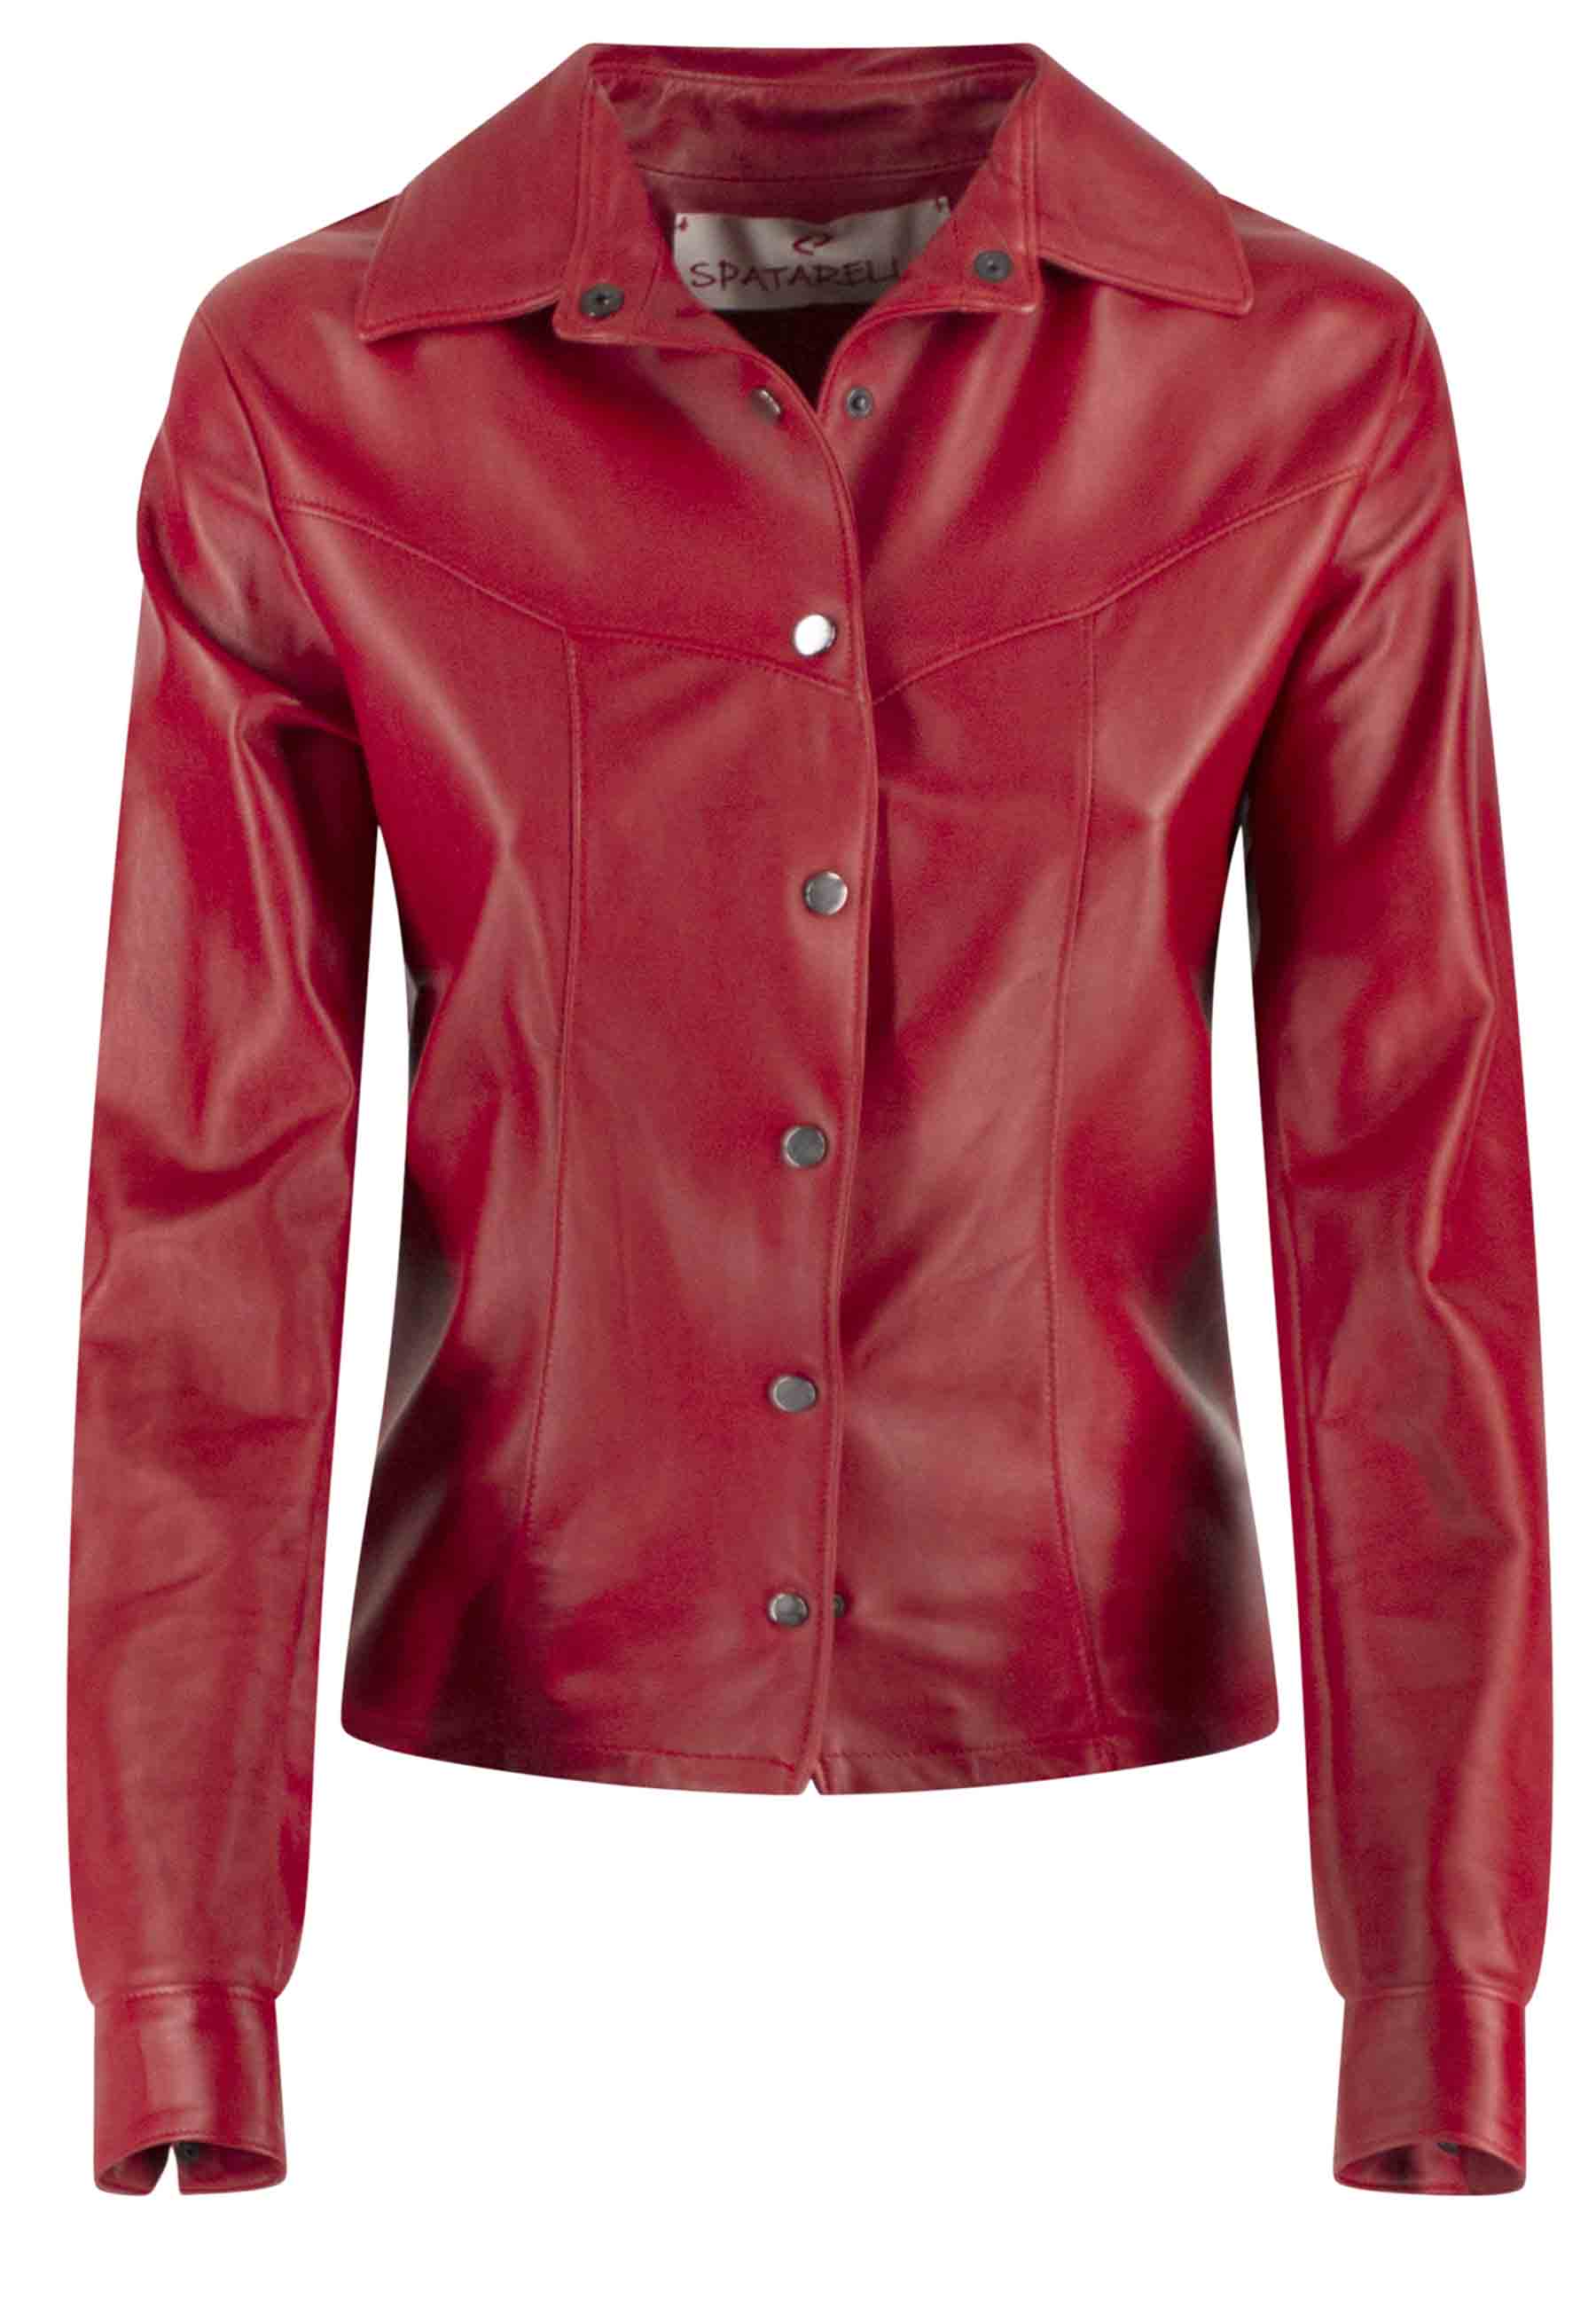 Women's red unlined leather shirt with long sleeves